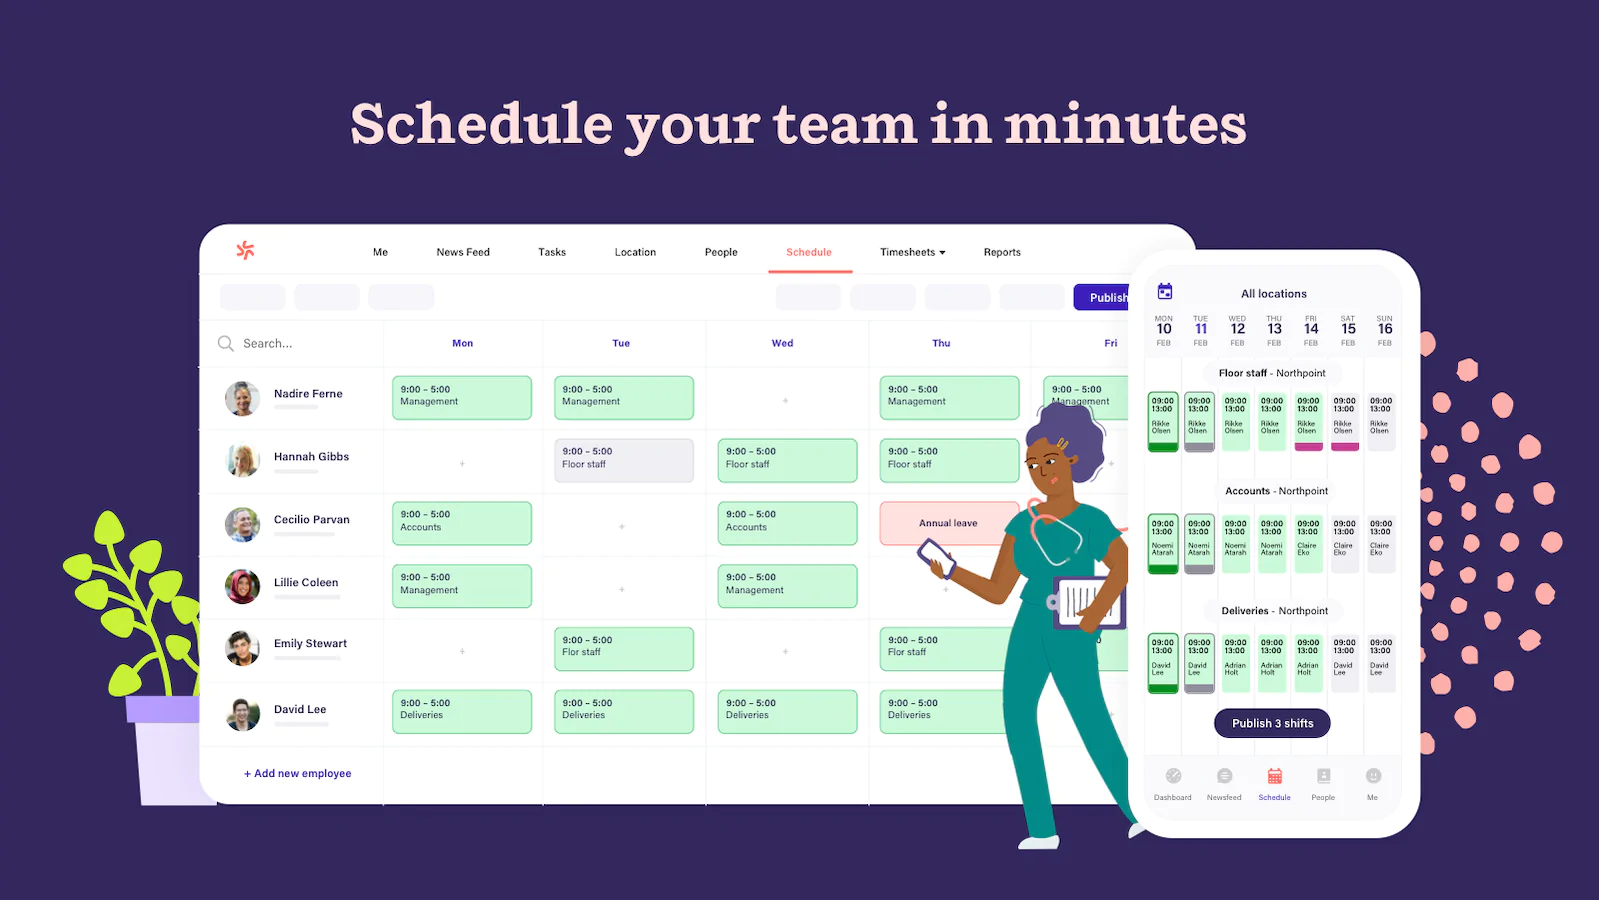 Schedule your team quickly